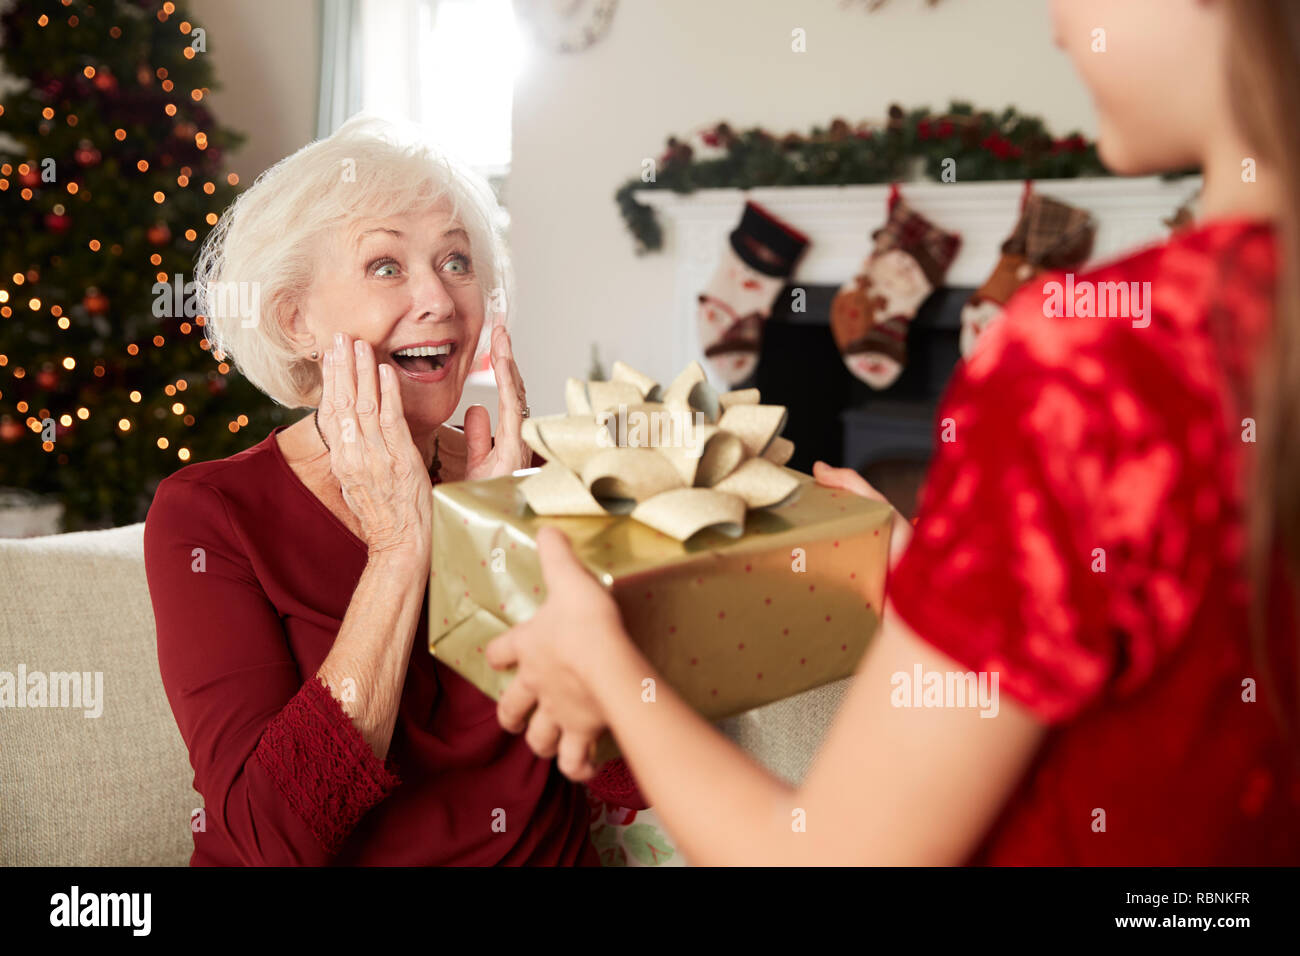 https://c8.alamy.com/comp/RBNKFR/excited-grandmother-receiving-christmas-gift-from-granddaughter-at-home-RBNKFR.jpg